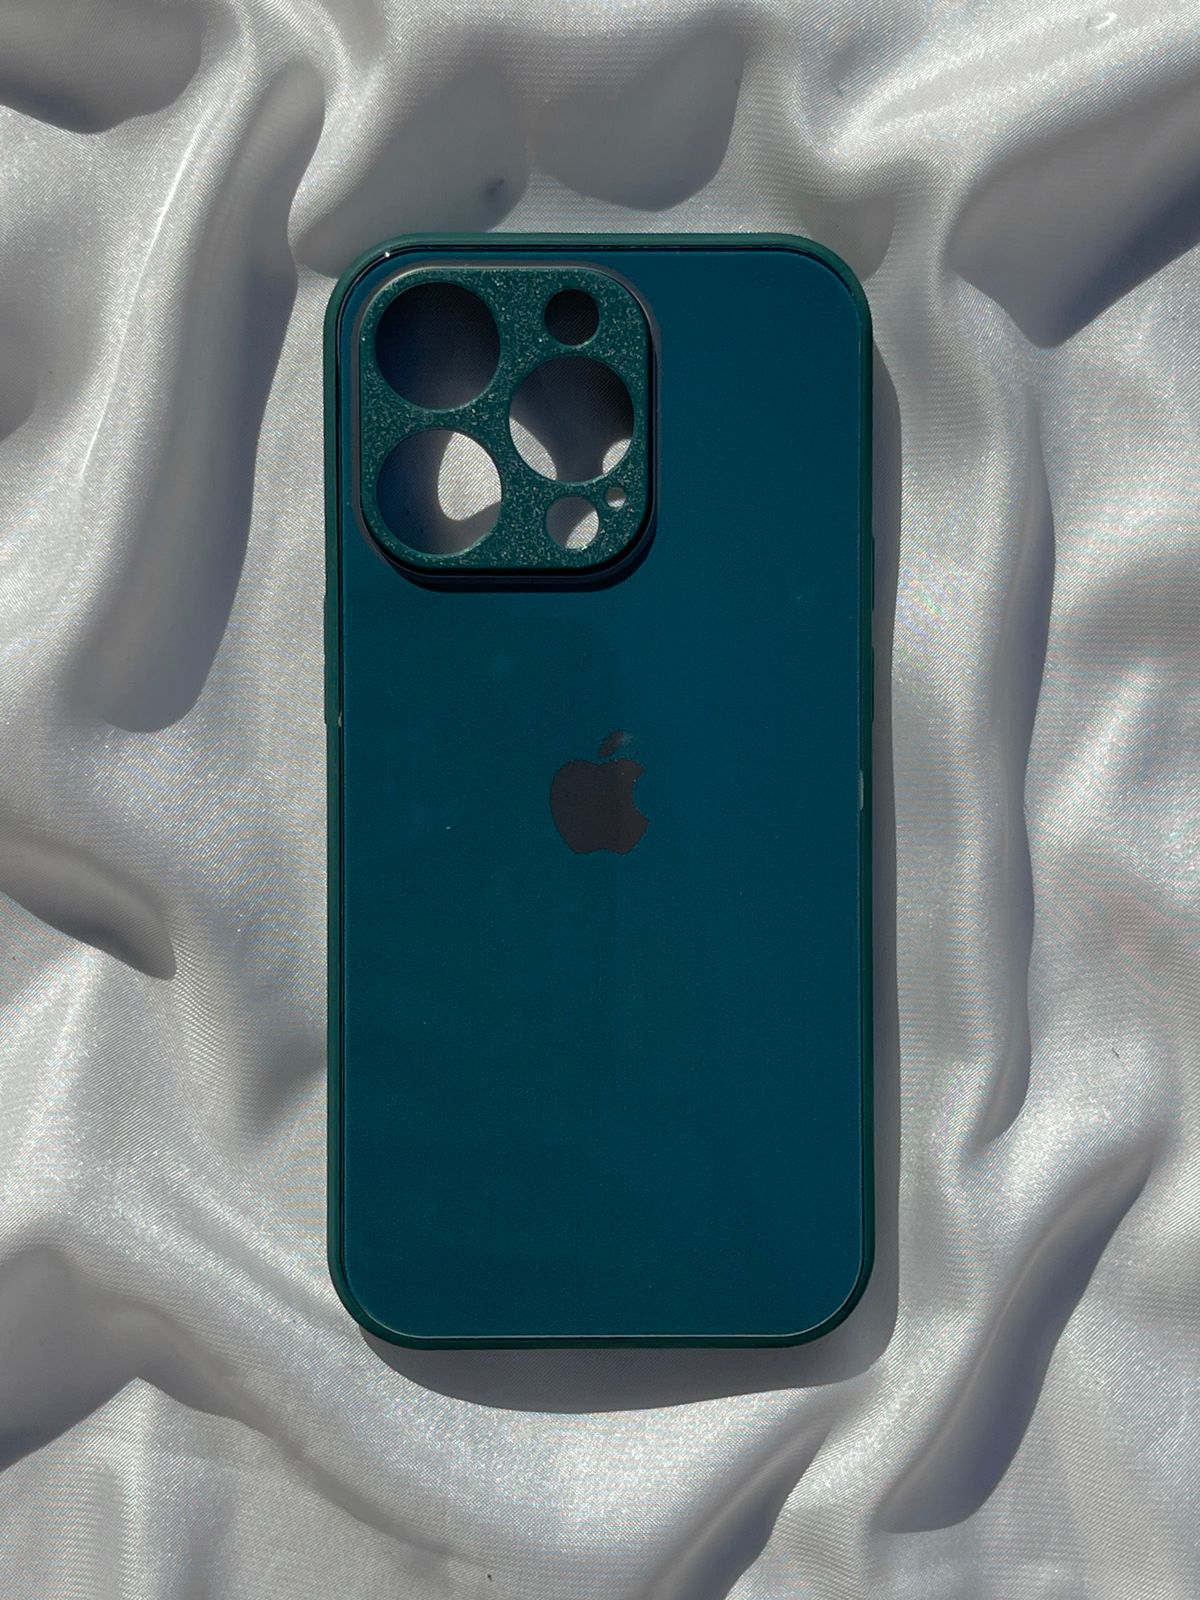 iPhone "14 Pro" Tempered Glass "Chrome" Case